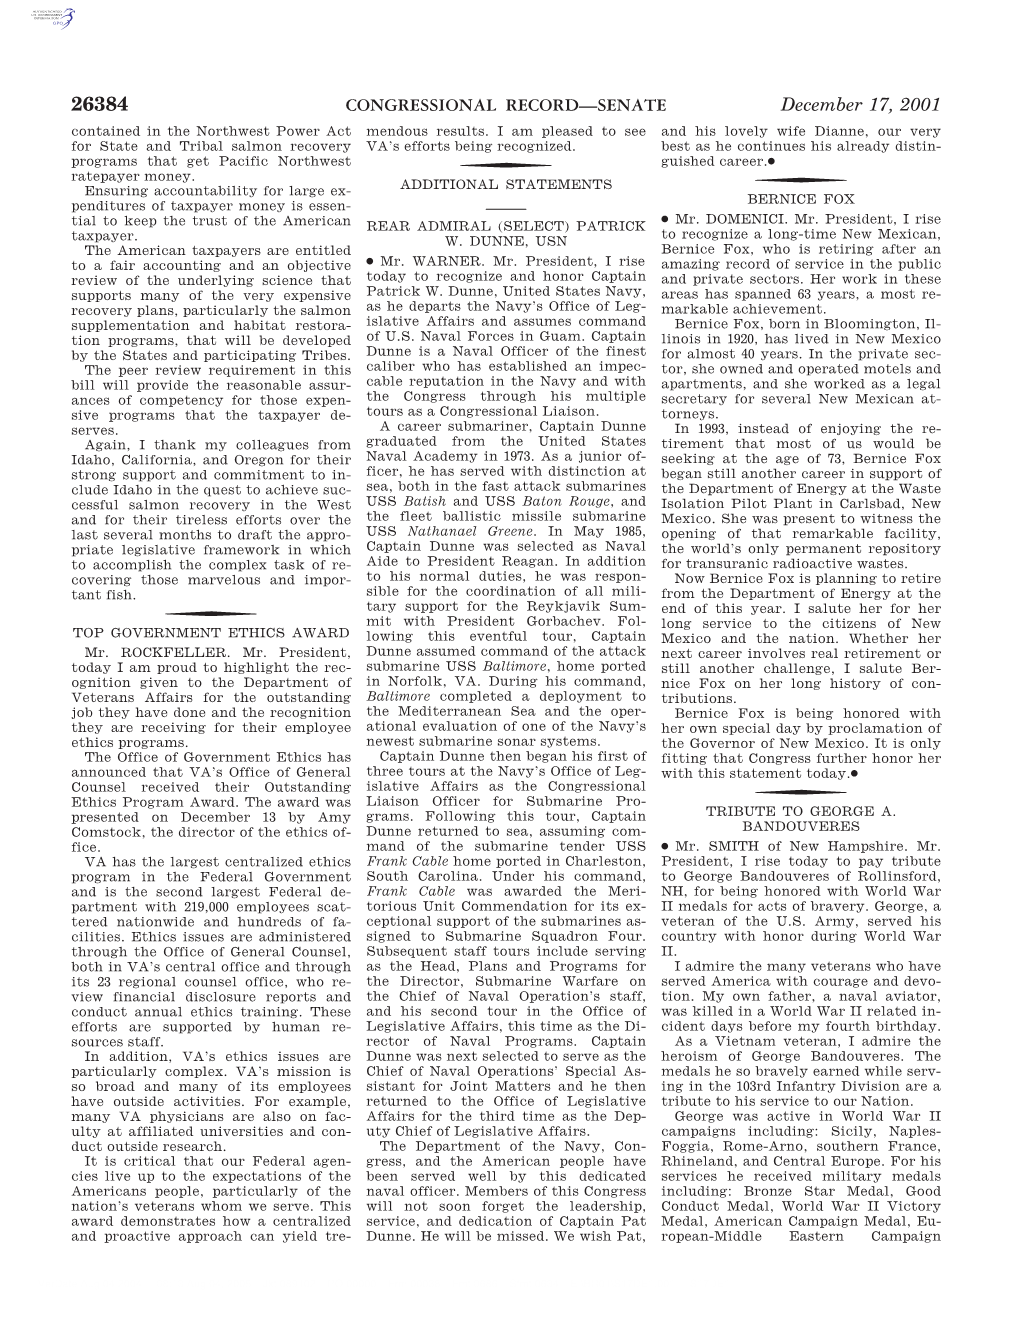 CONGRESSIONAL RECORD—SENATE December 17, 2001 Contained in the Northwest Power Act Mendous Results